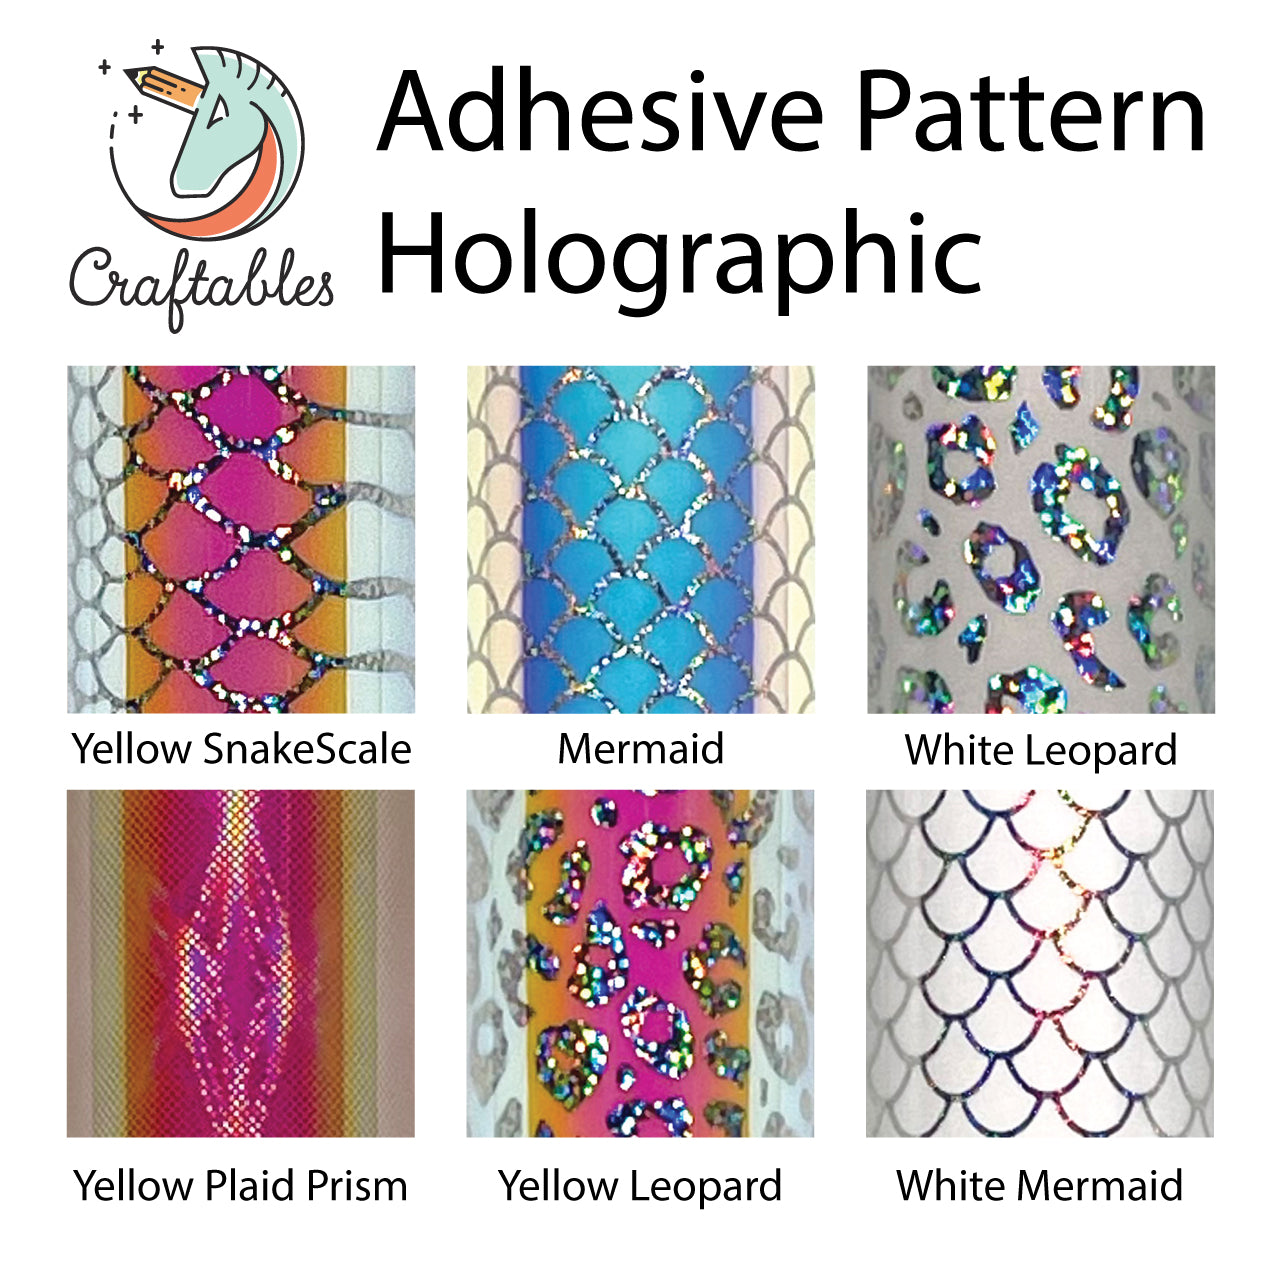 Mermaid Pattern Holographic Adhesive Vinyl Sheets By Craftables